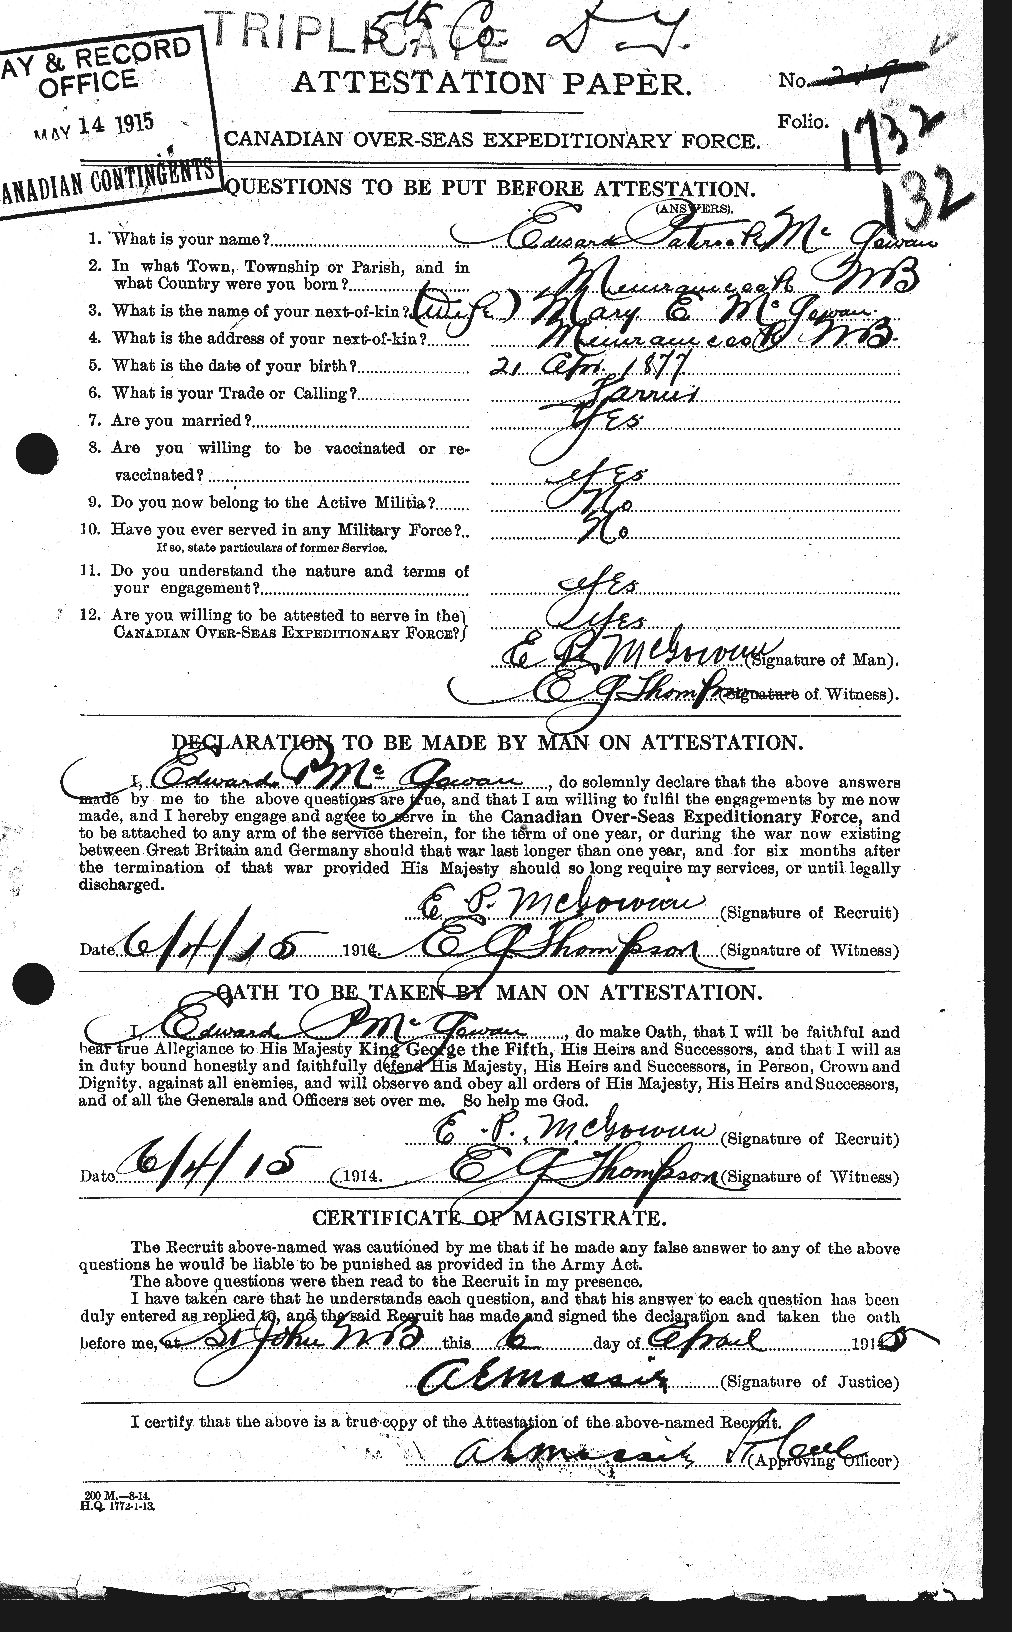 Personnel Records of the First World War - CEF 522561a